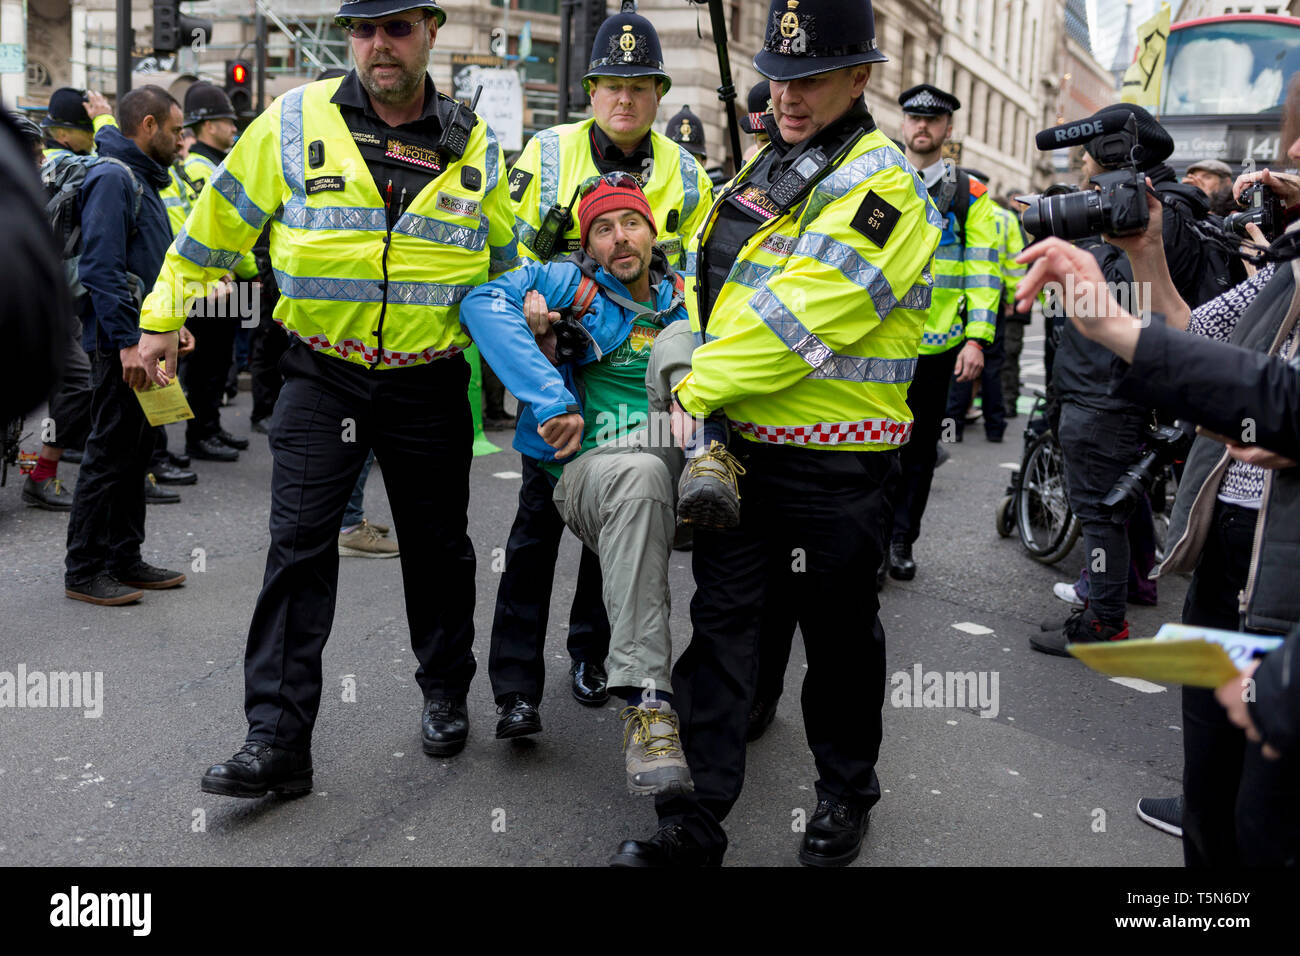 An environmental activist is arrested under Section 14 of the Public Order Act after blocking the highway at Bank in the City of London on the 11th and final day of protests, road-blockages and arrests across London by the climate change campaign Extinction Rebellion, on 25th April 2019, in London, England. Stock Photo